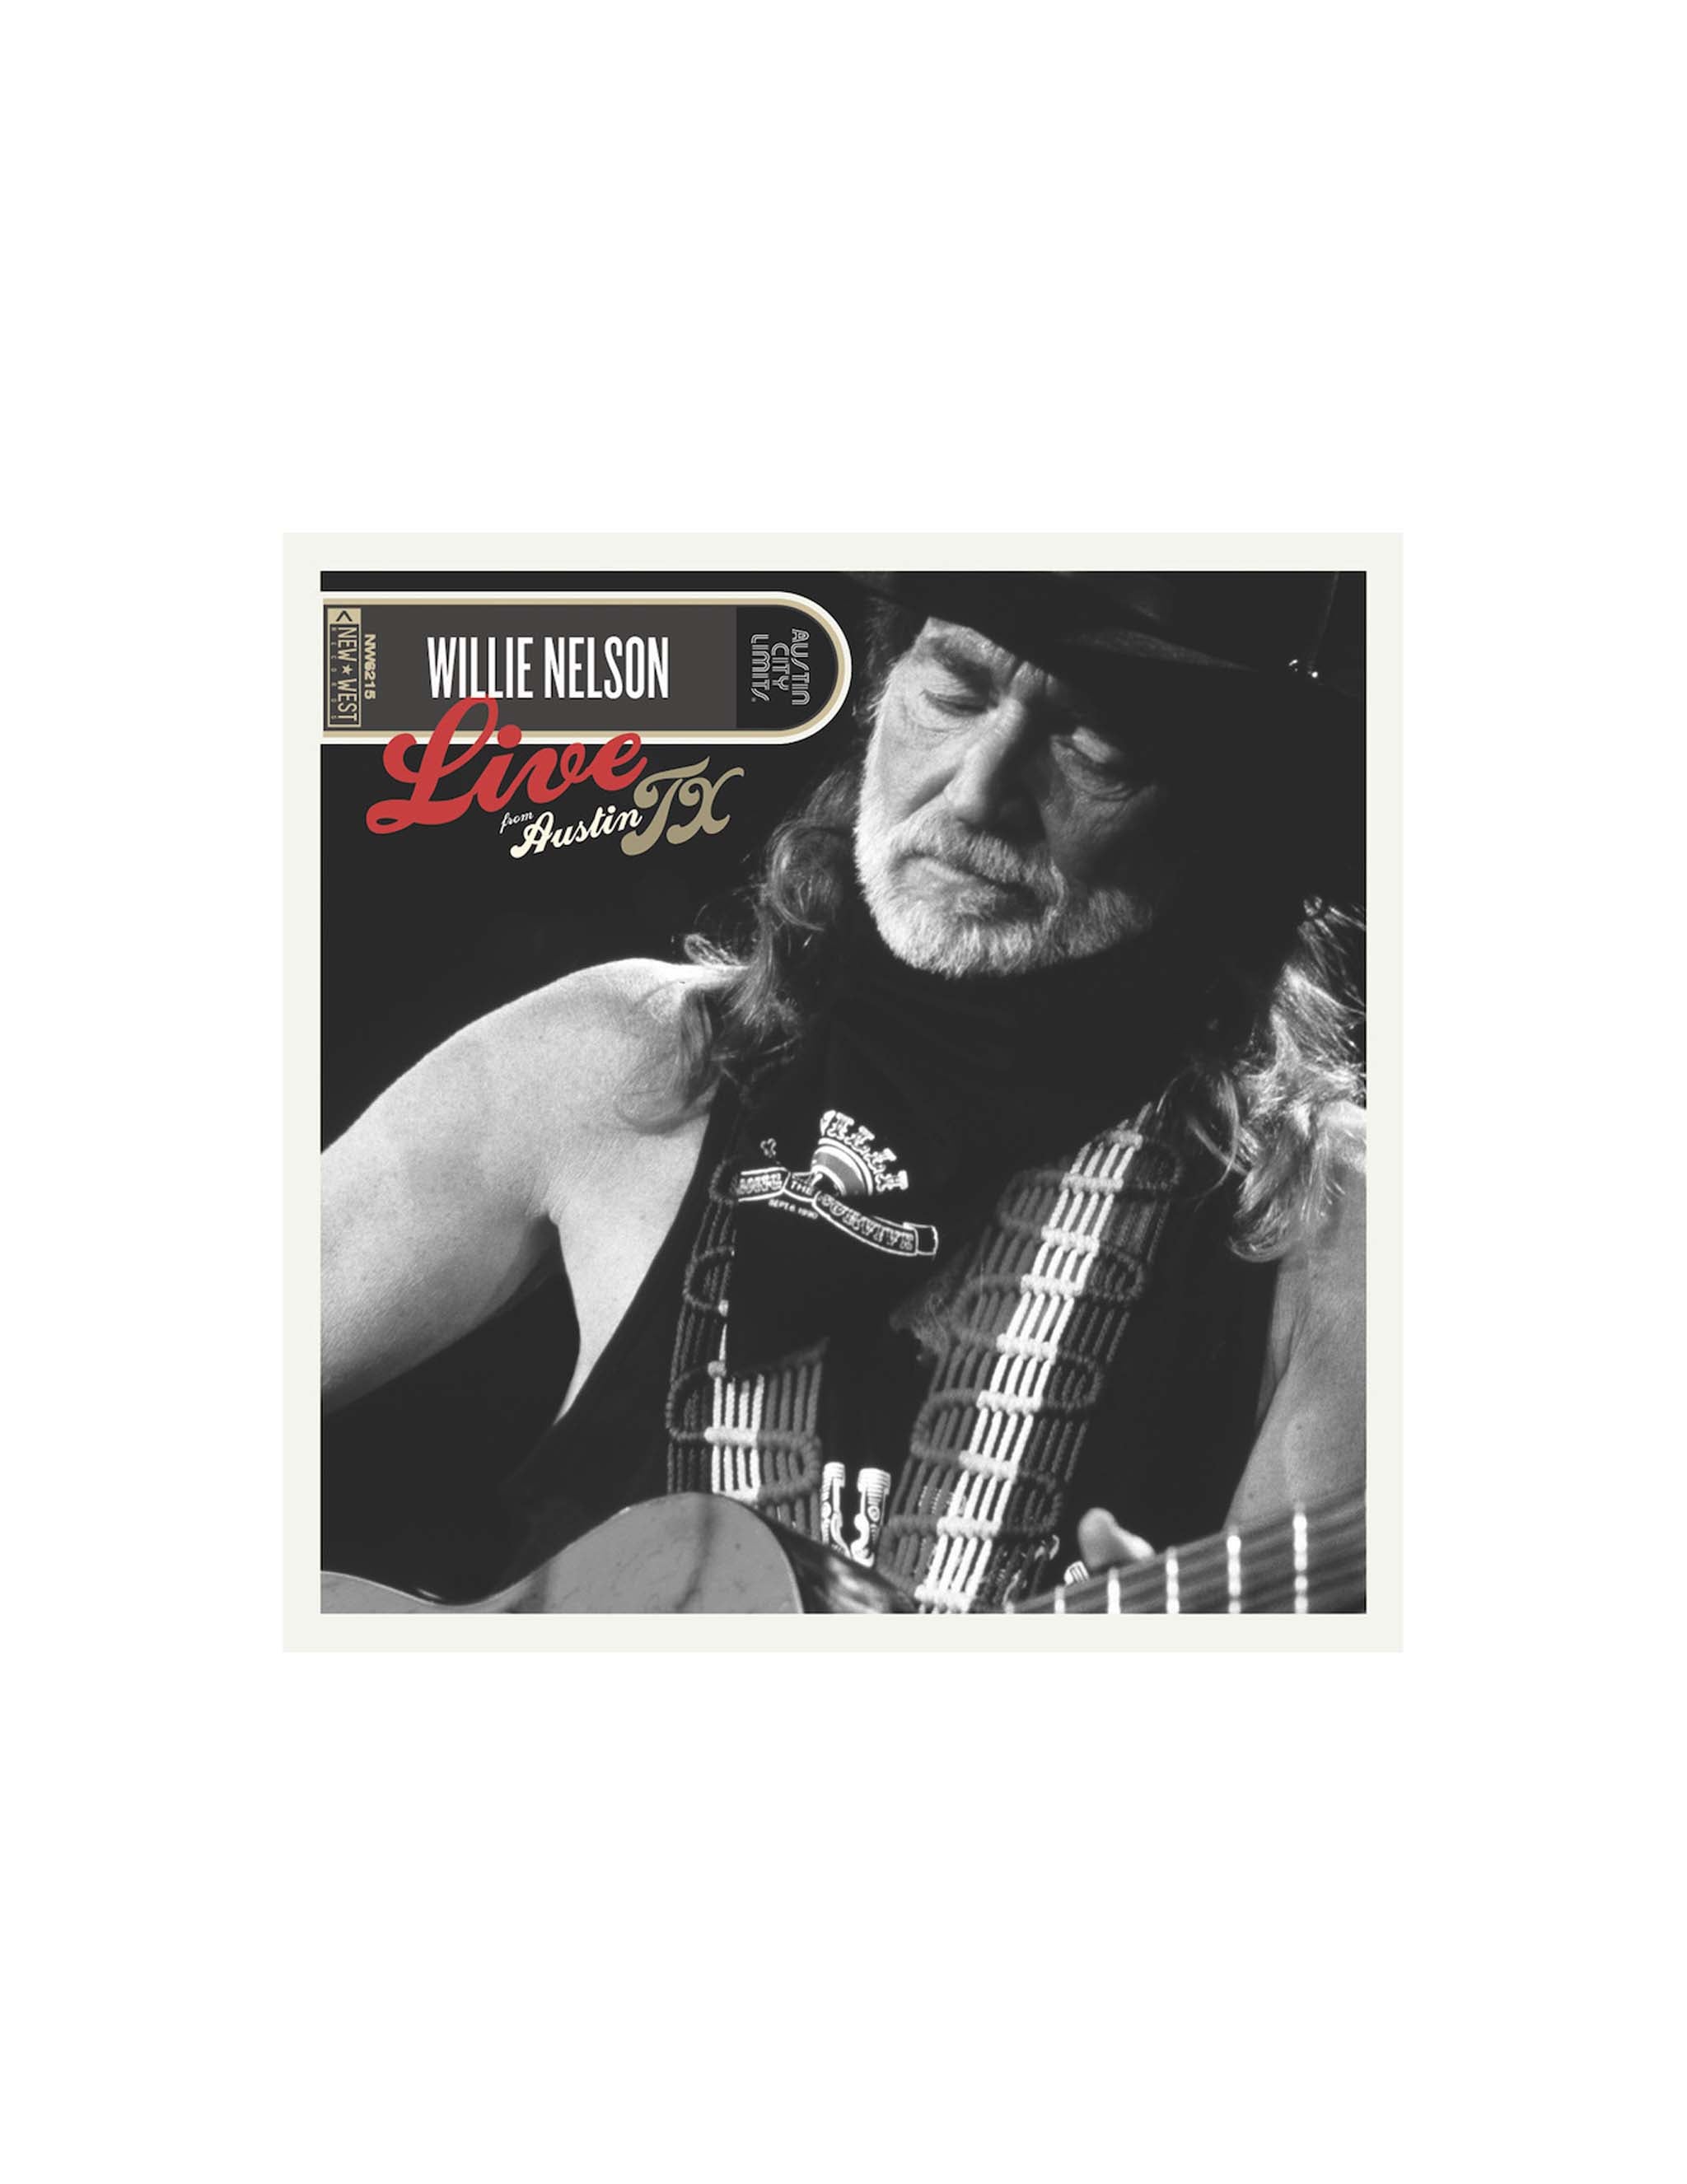 Willie Nelson: Live from Austin, TX (LP)